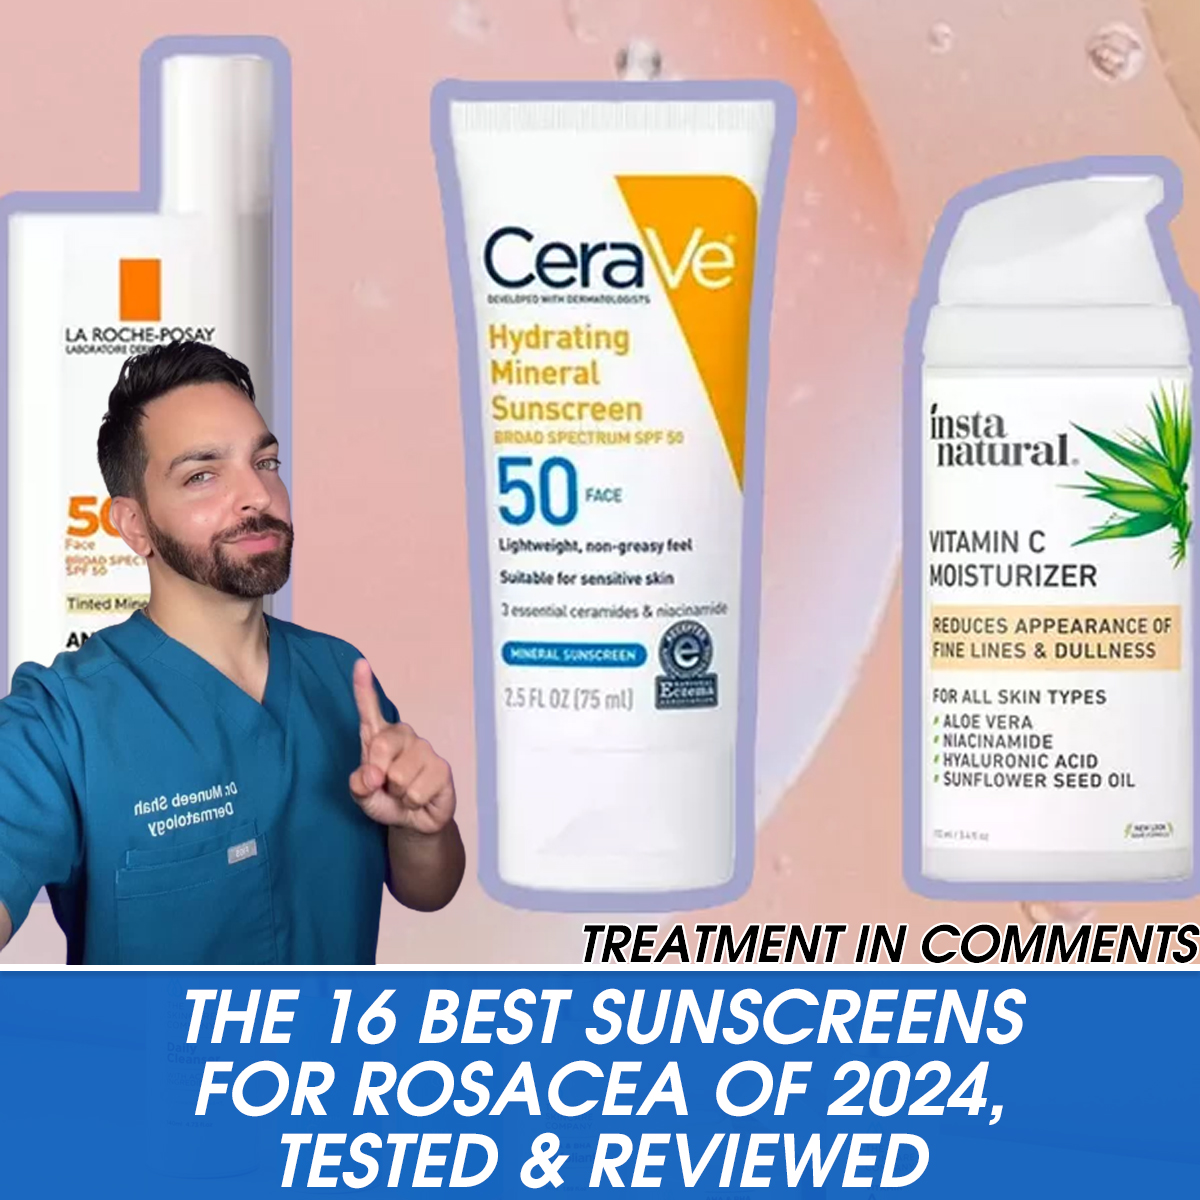 The 16 Best Sunscreens for Rosacea of 2024, Tested & Reviewed